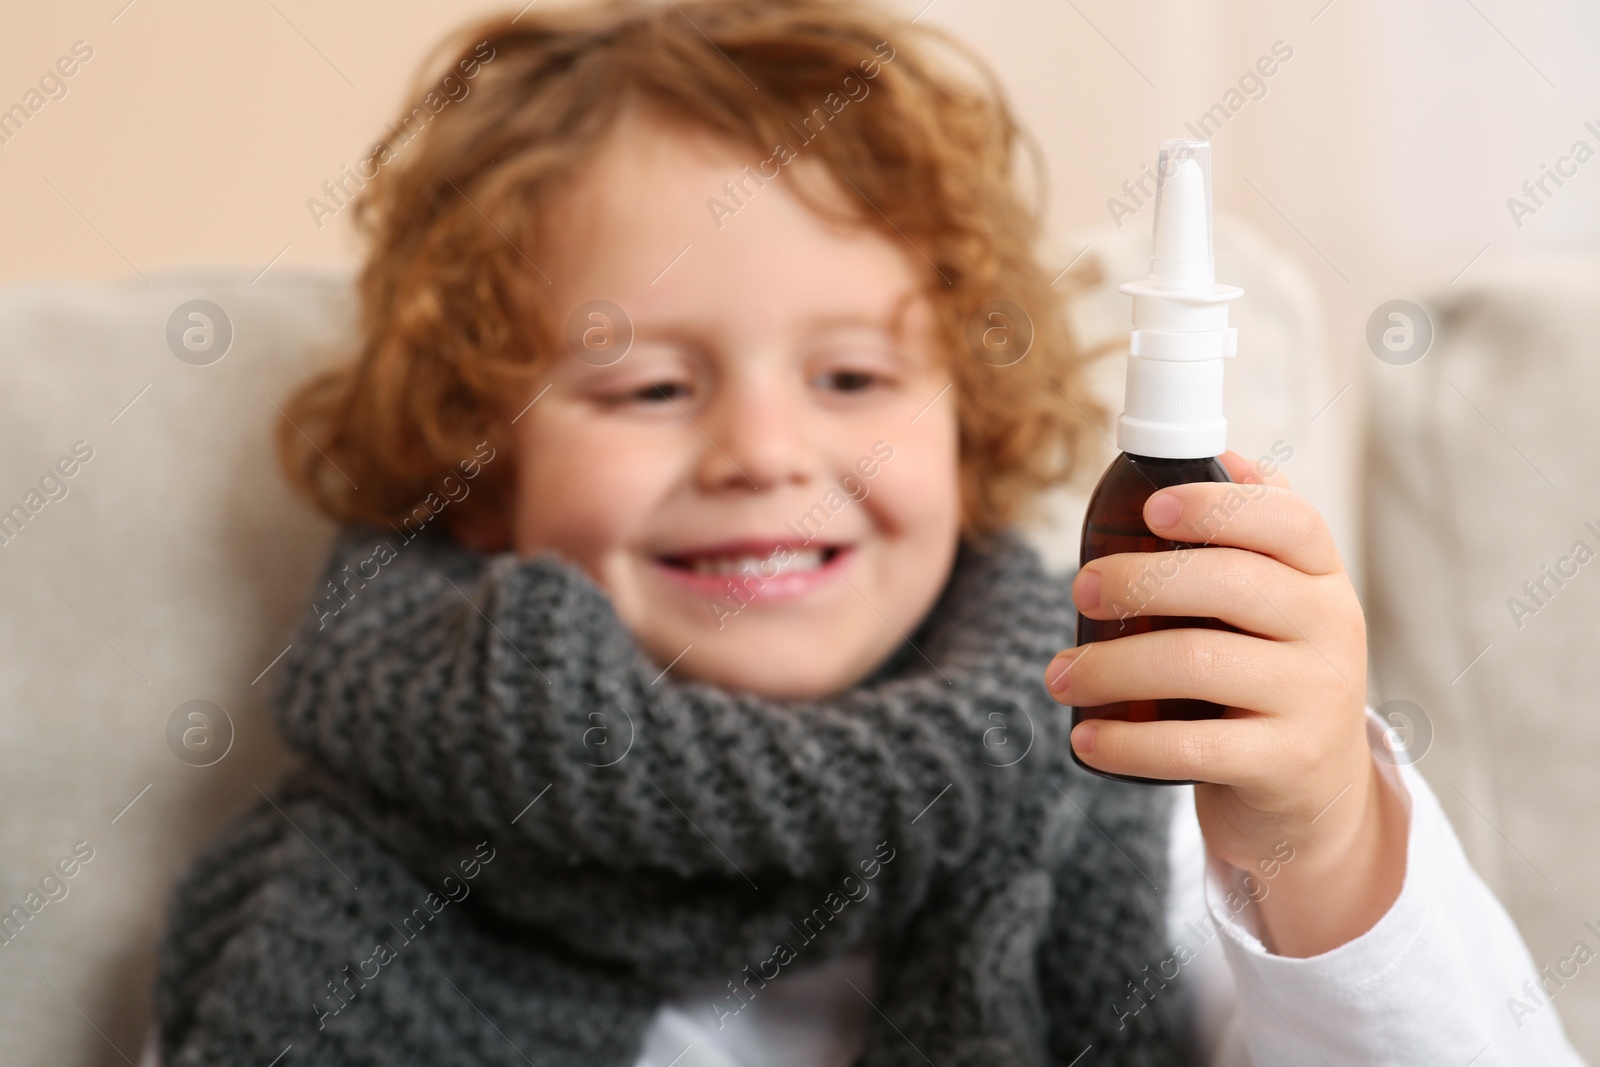 Photo of Cute little boy showing nasal spray indoors, focus on bottle